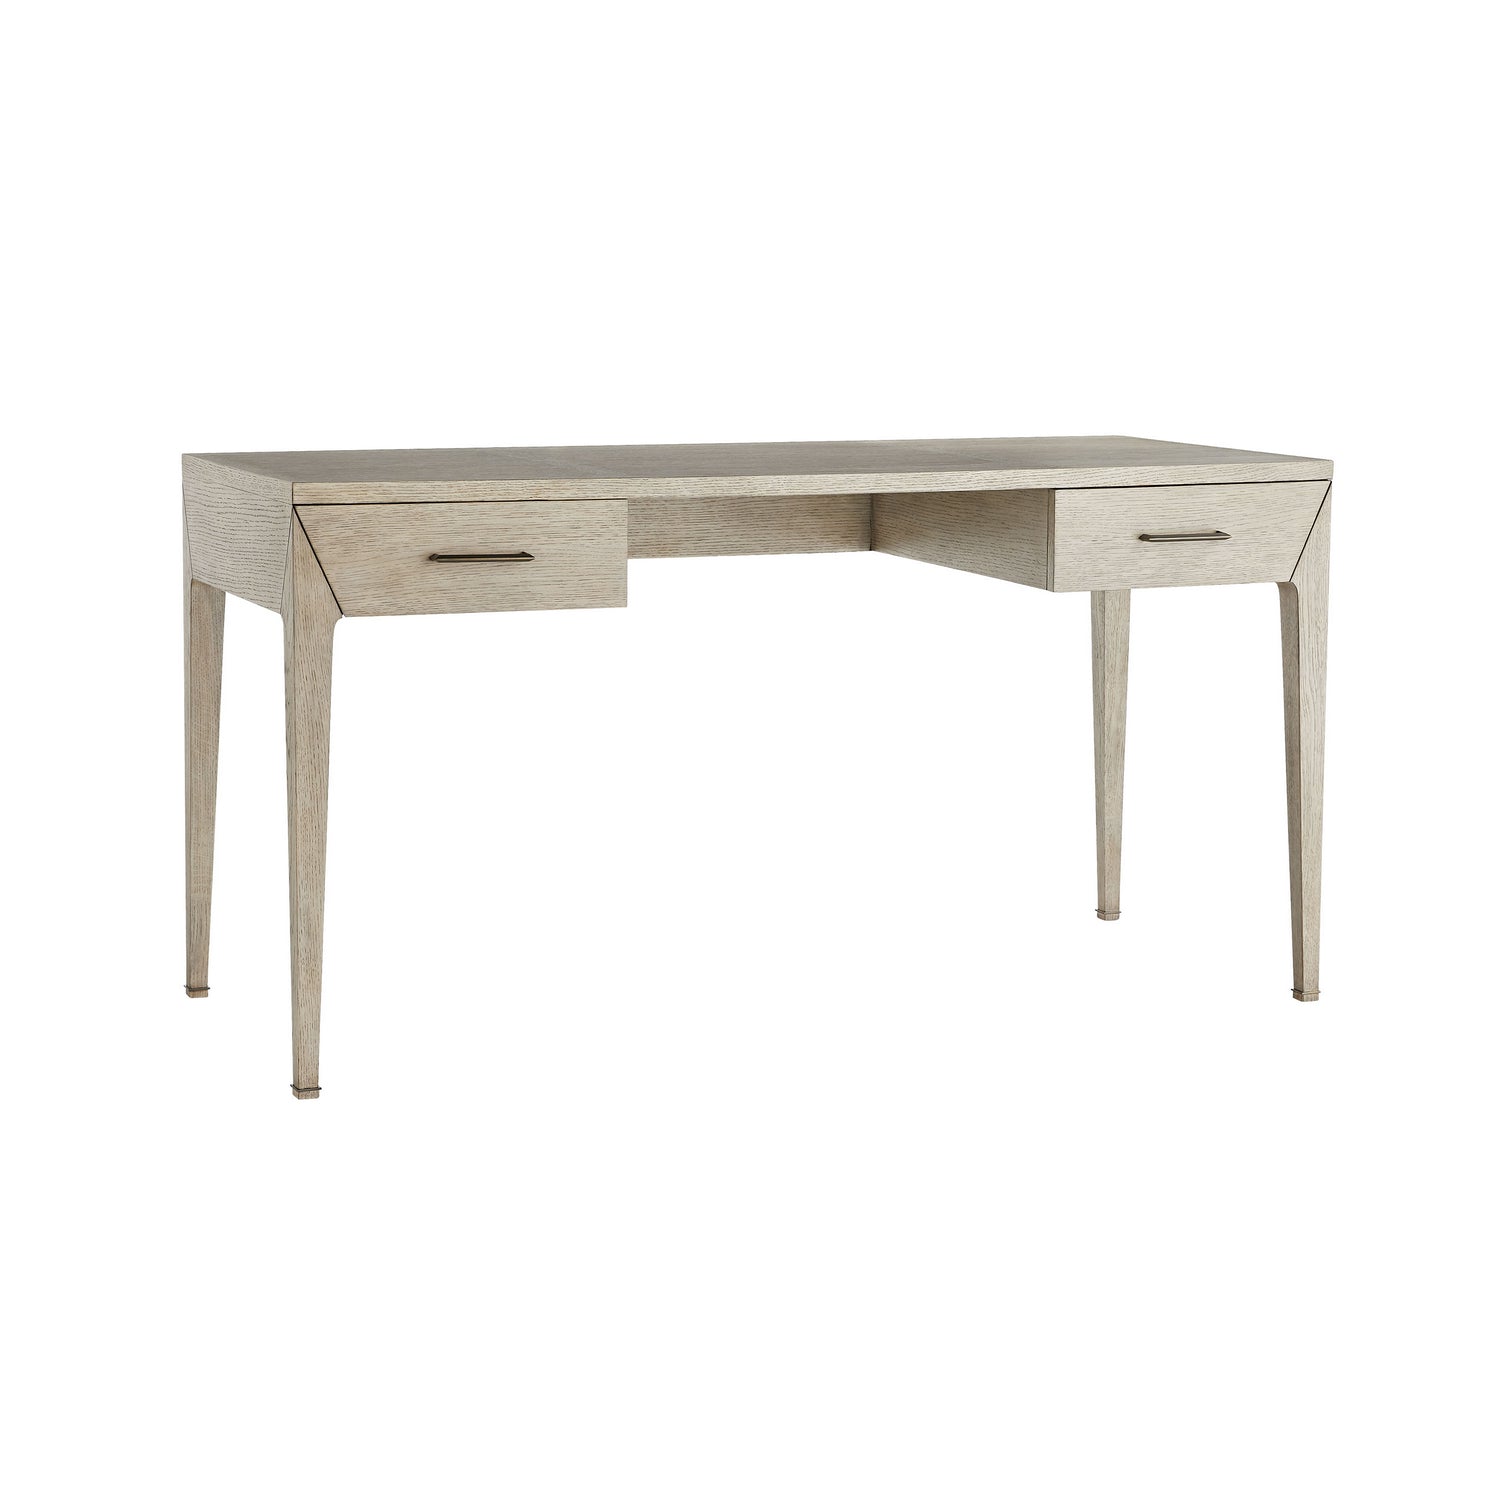 Desk from the Dublin collection in Smoke finish